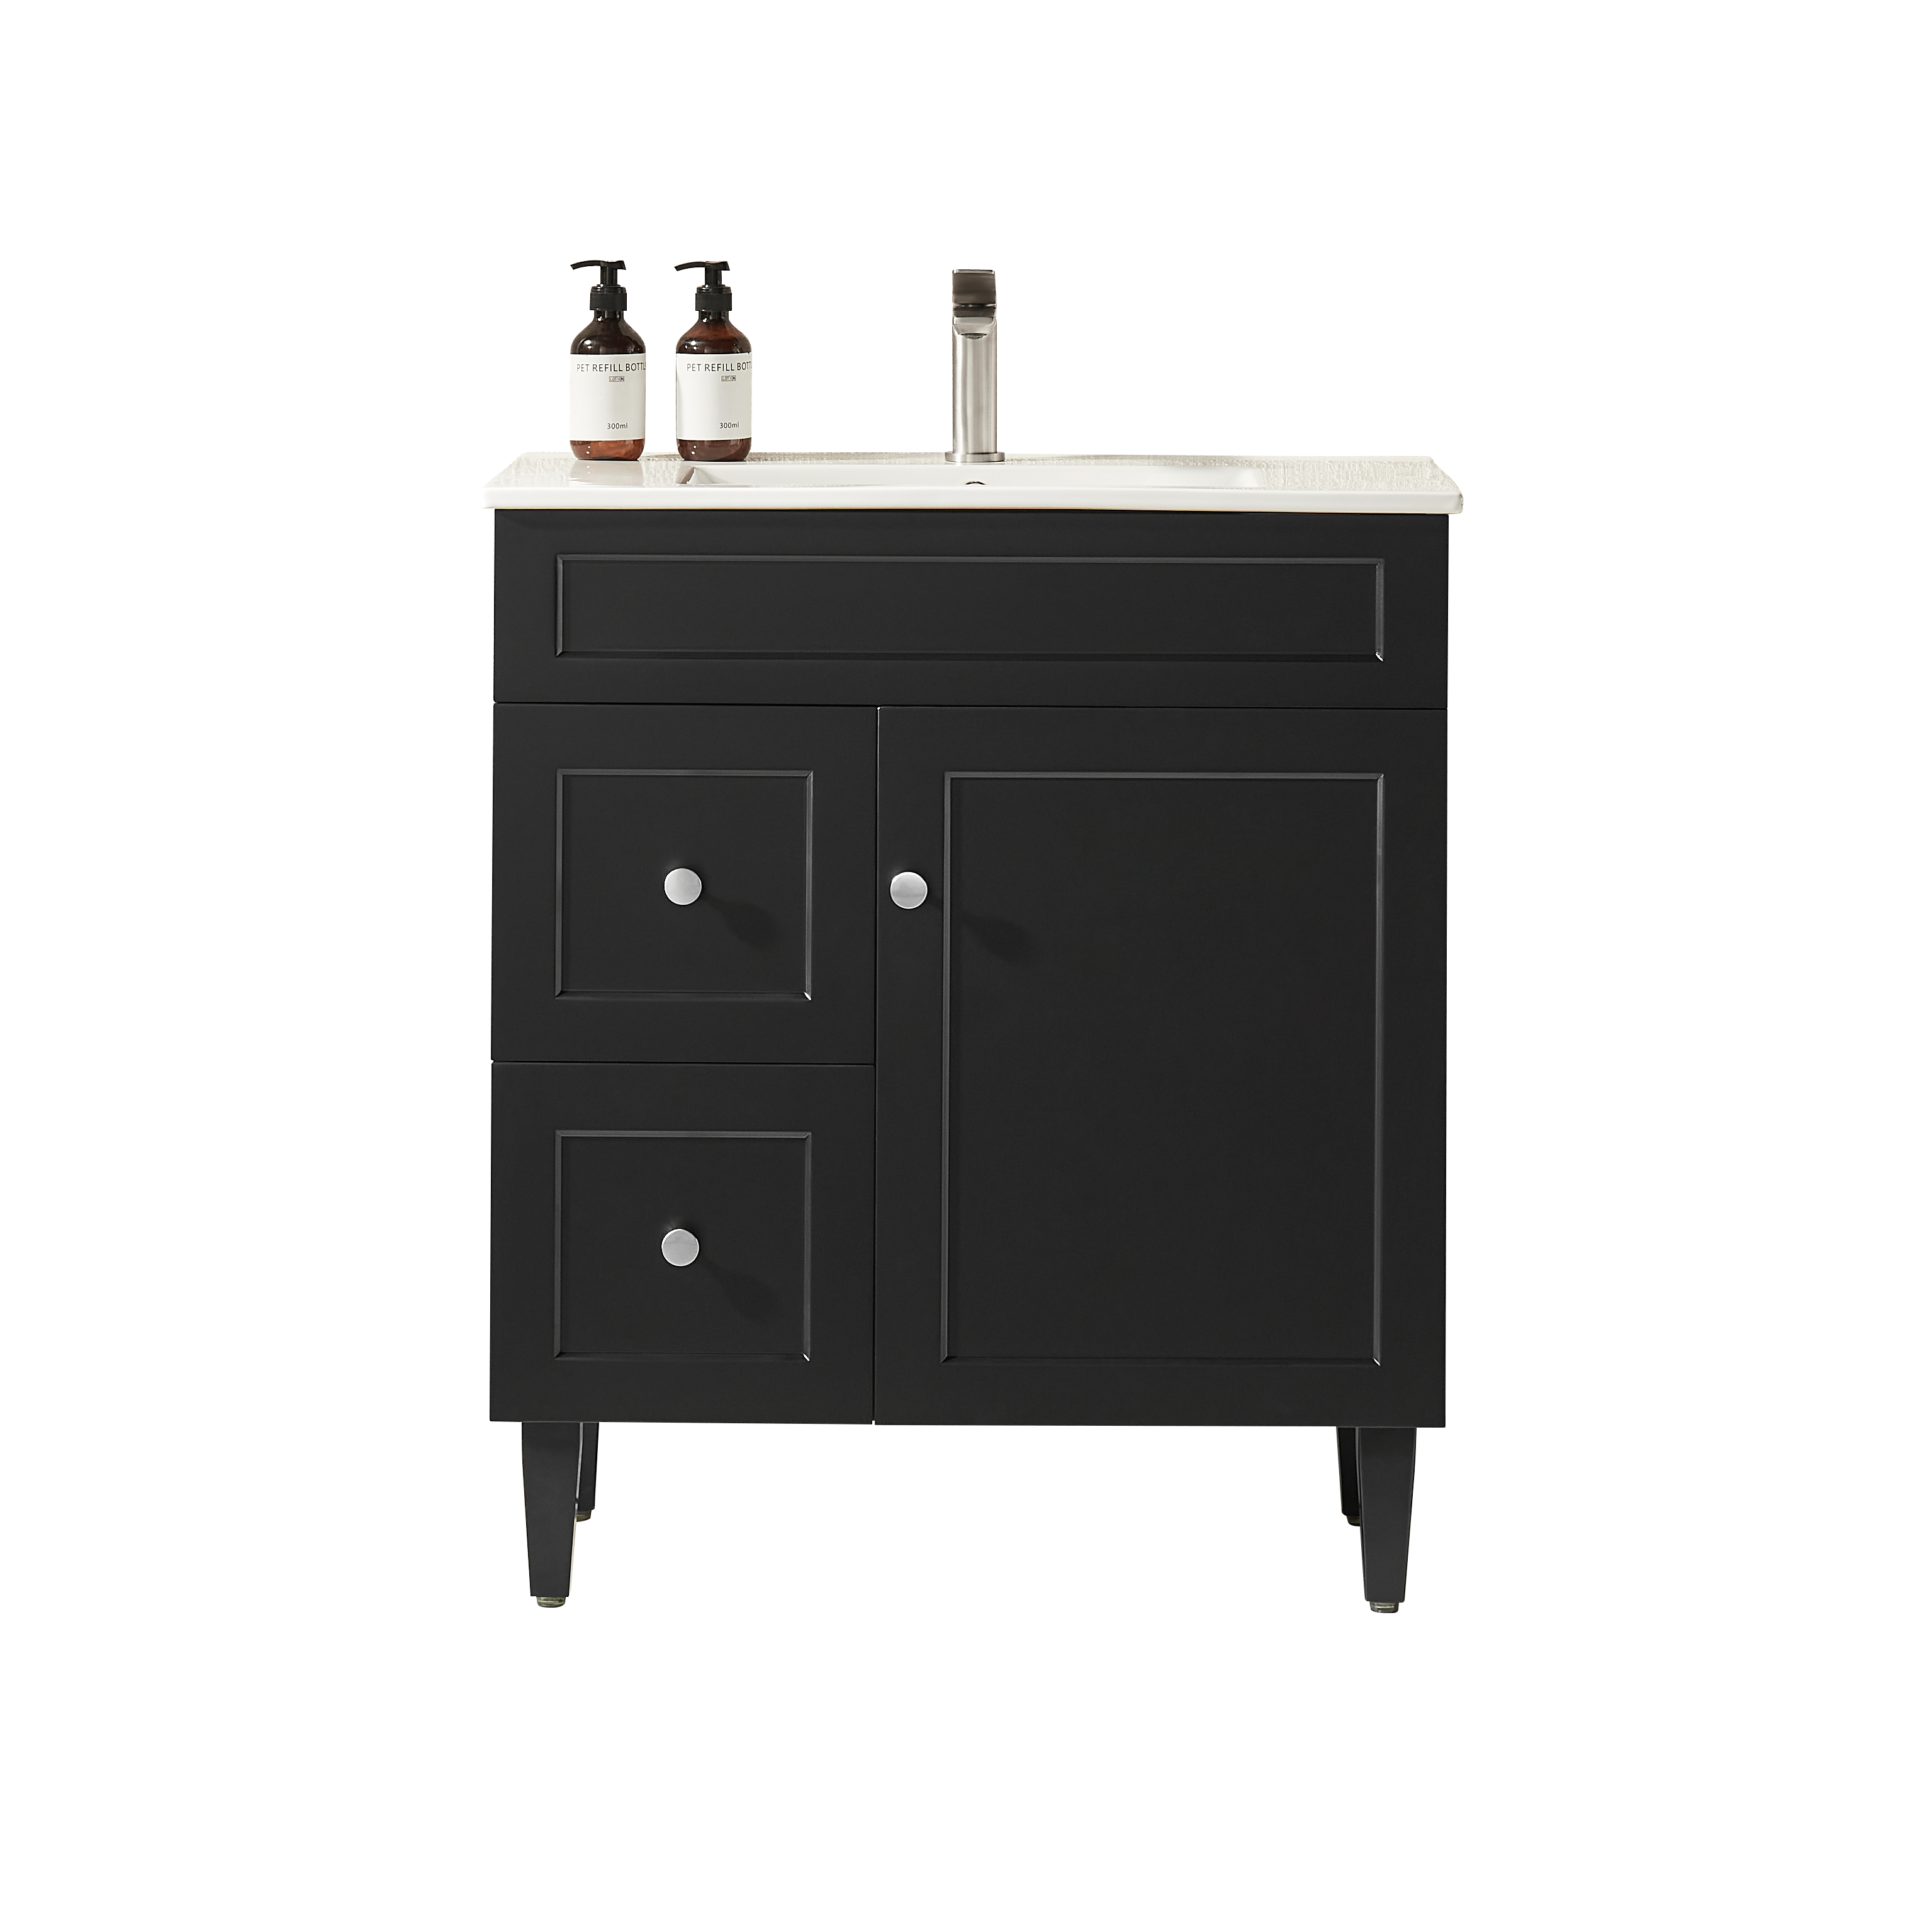 CETO HARRINGTON MATTE BLACK 750MM SINGLE BOWL FLOOR STANDING VANITY (AVAILABLE IN LEFT AND RIGHT HAND DRAWER)